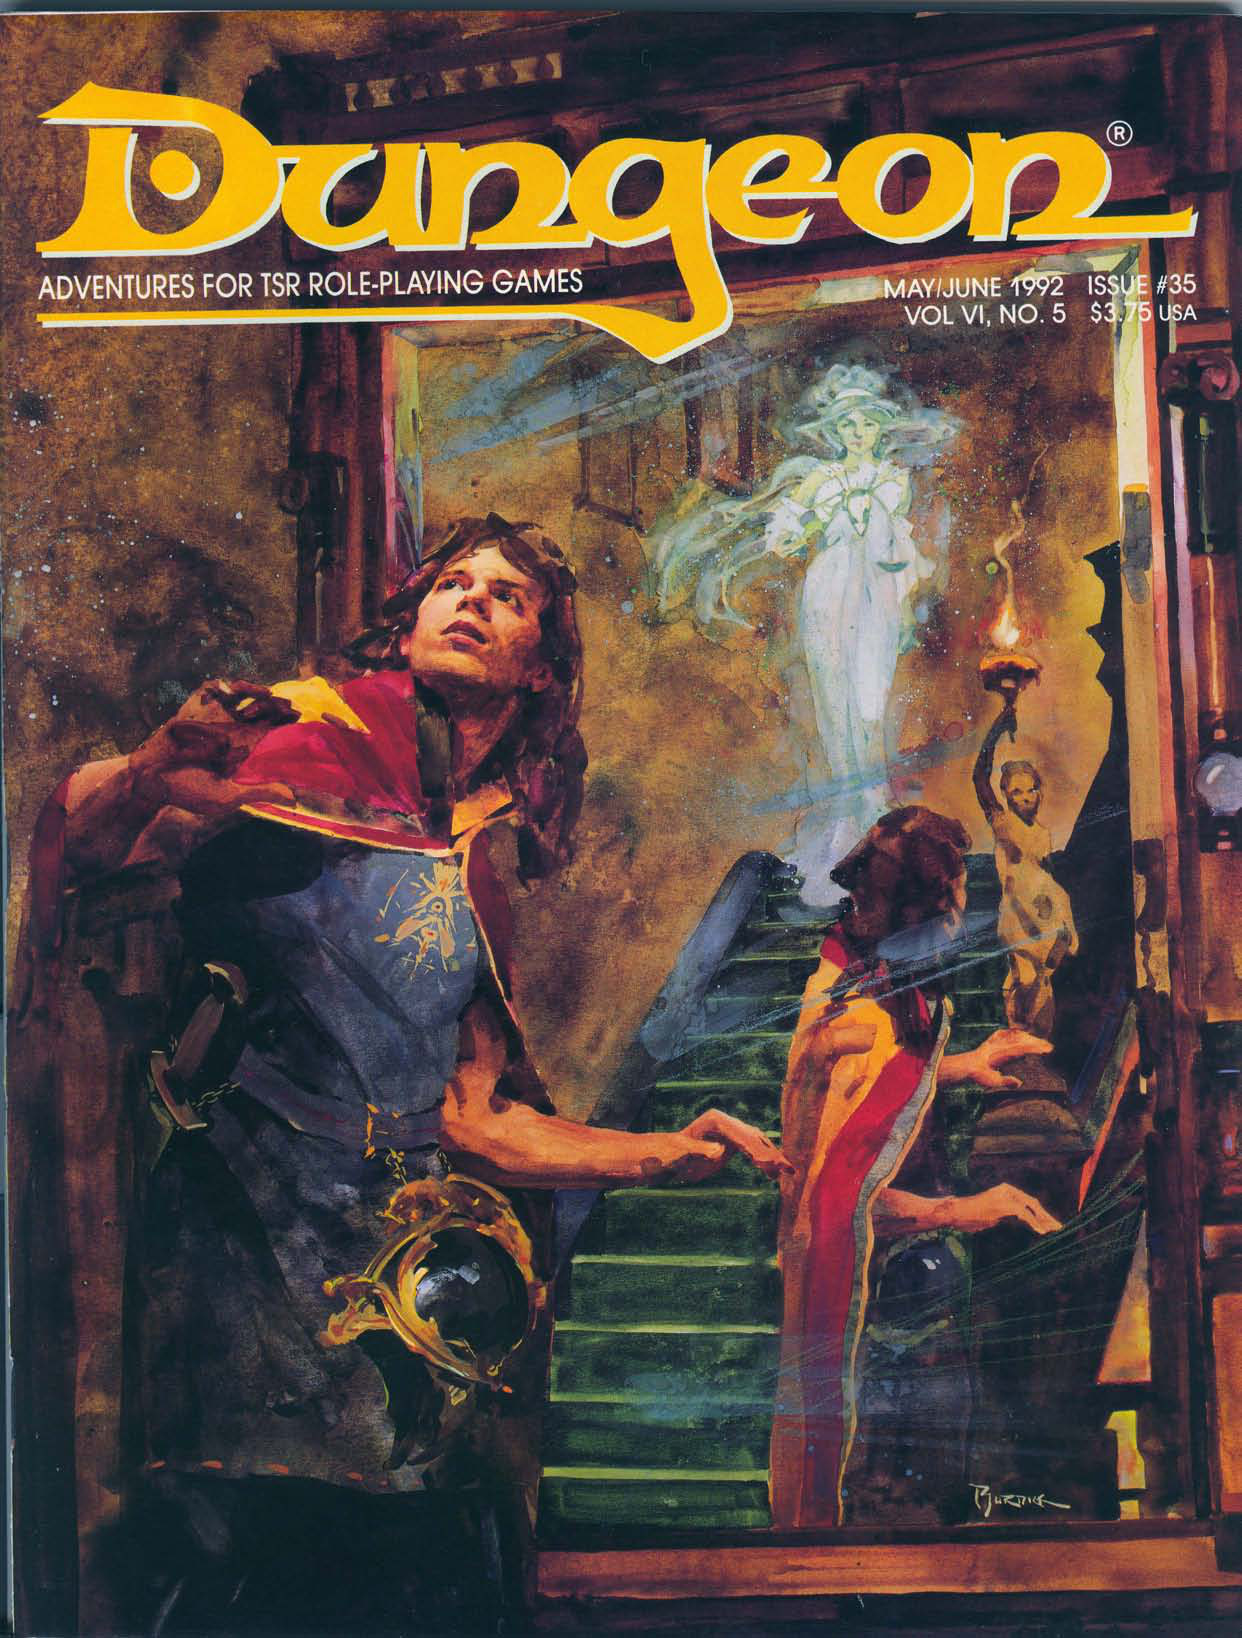 Dungeon #35Cover art